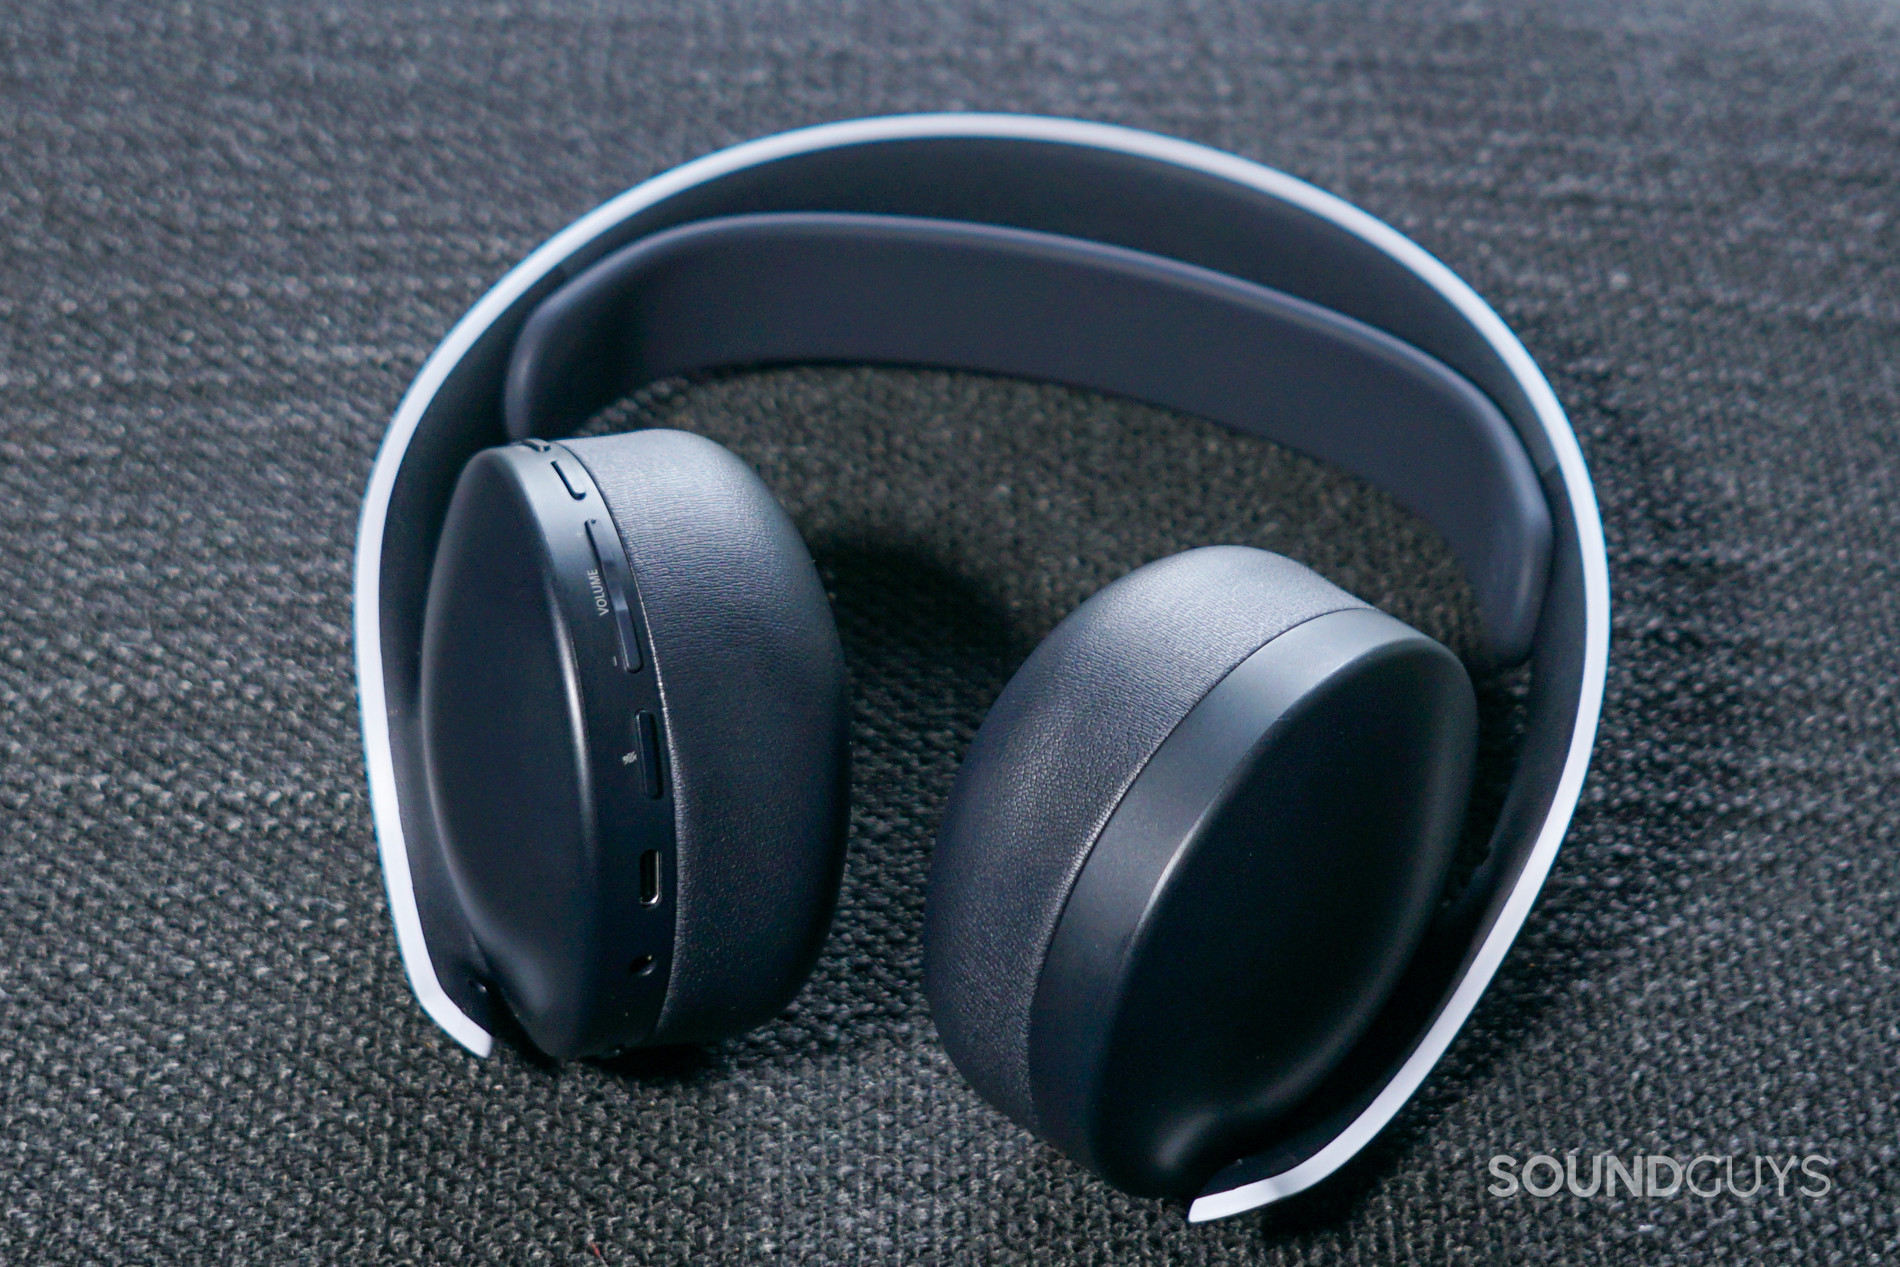 Sony Pulse 3D headset review